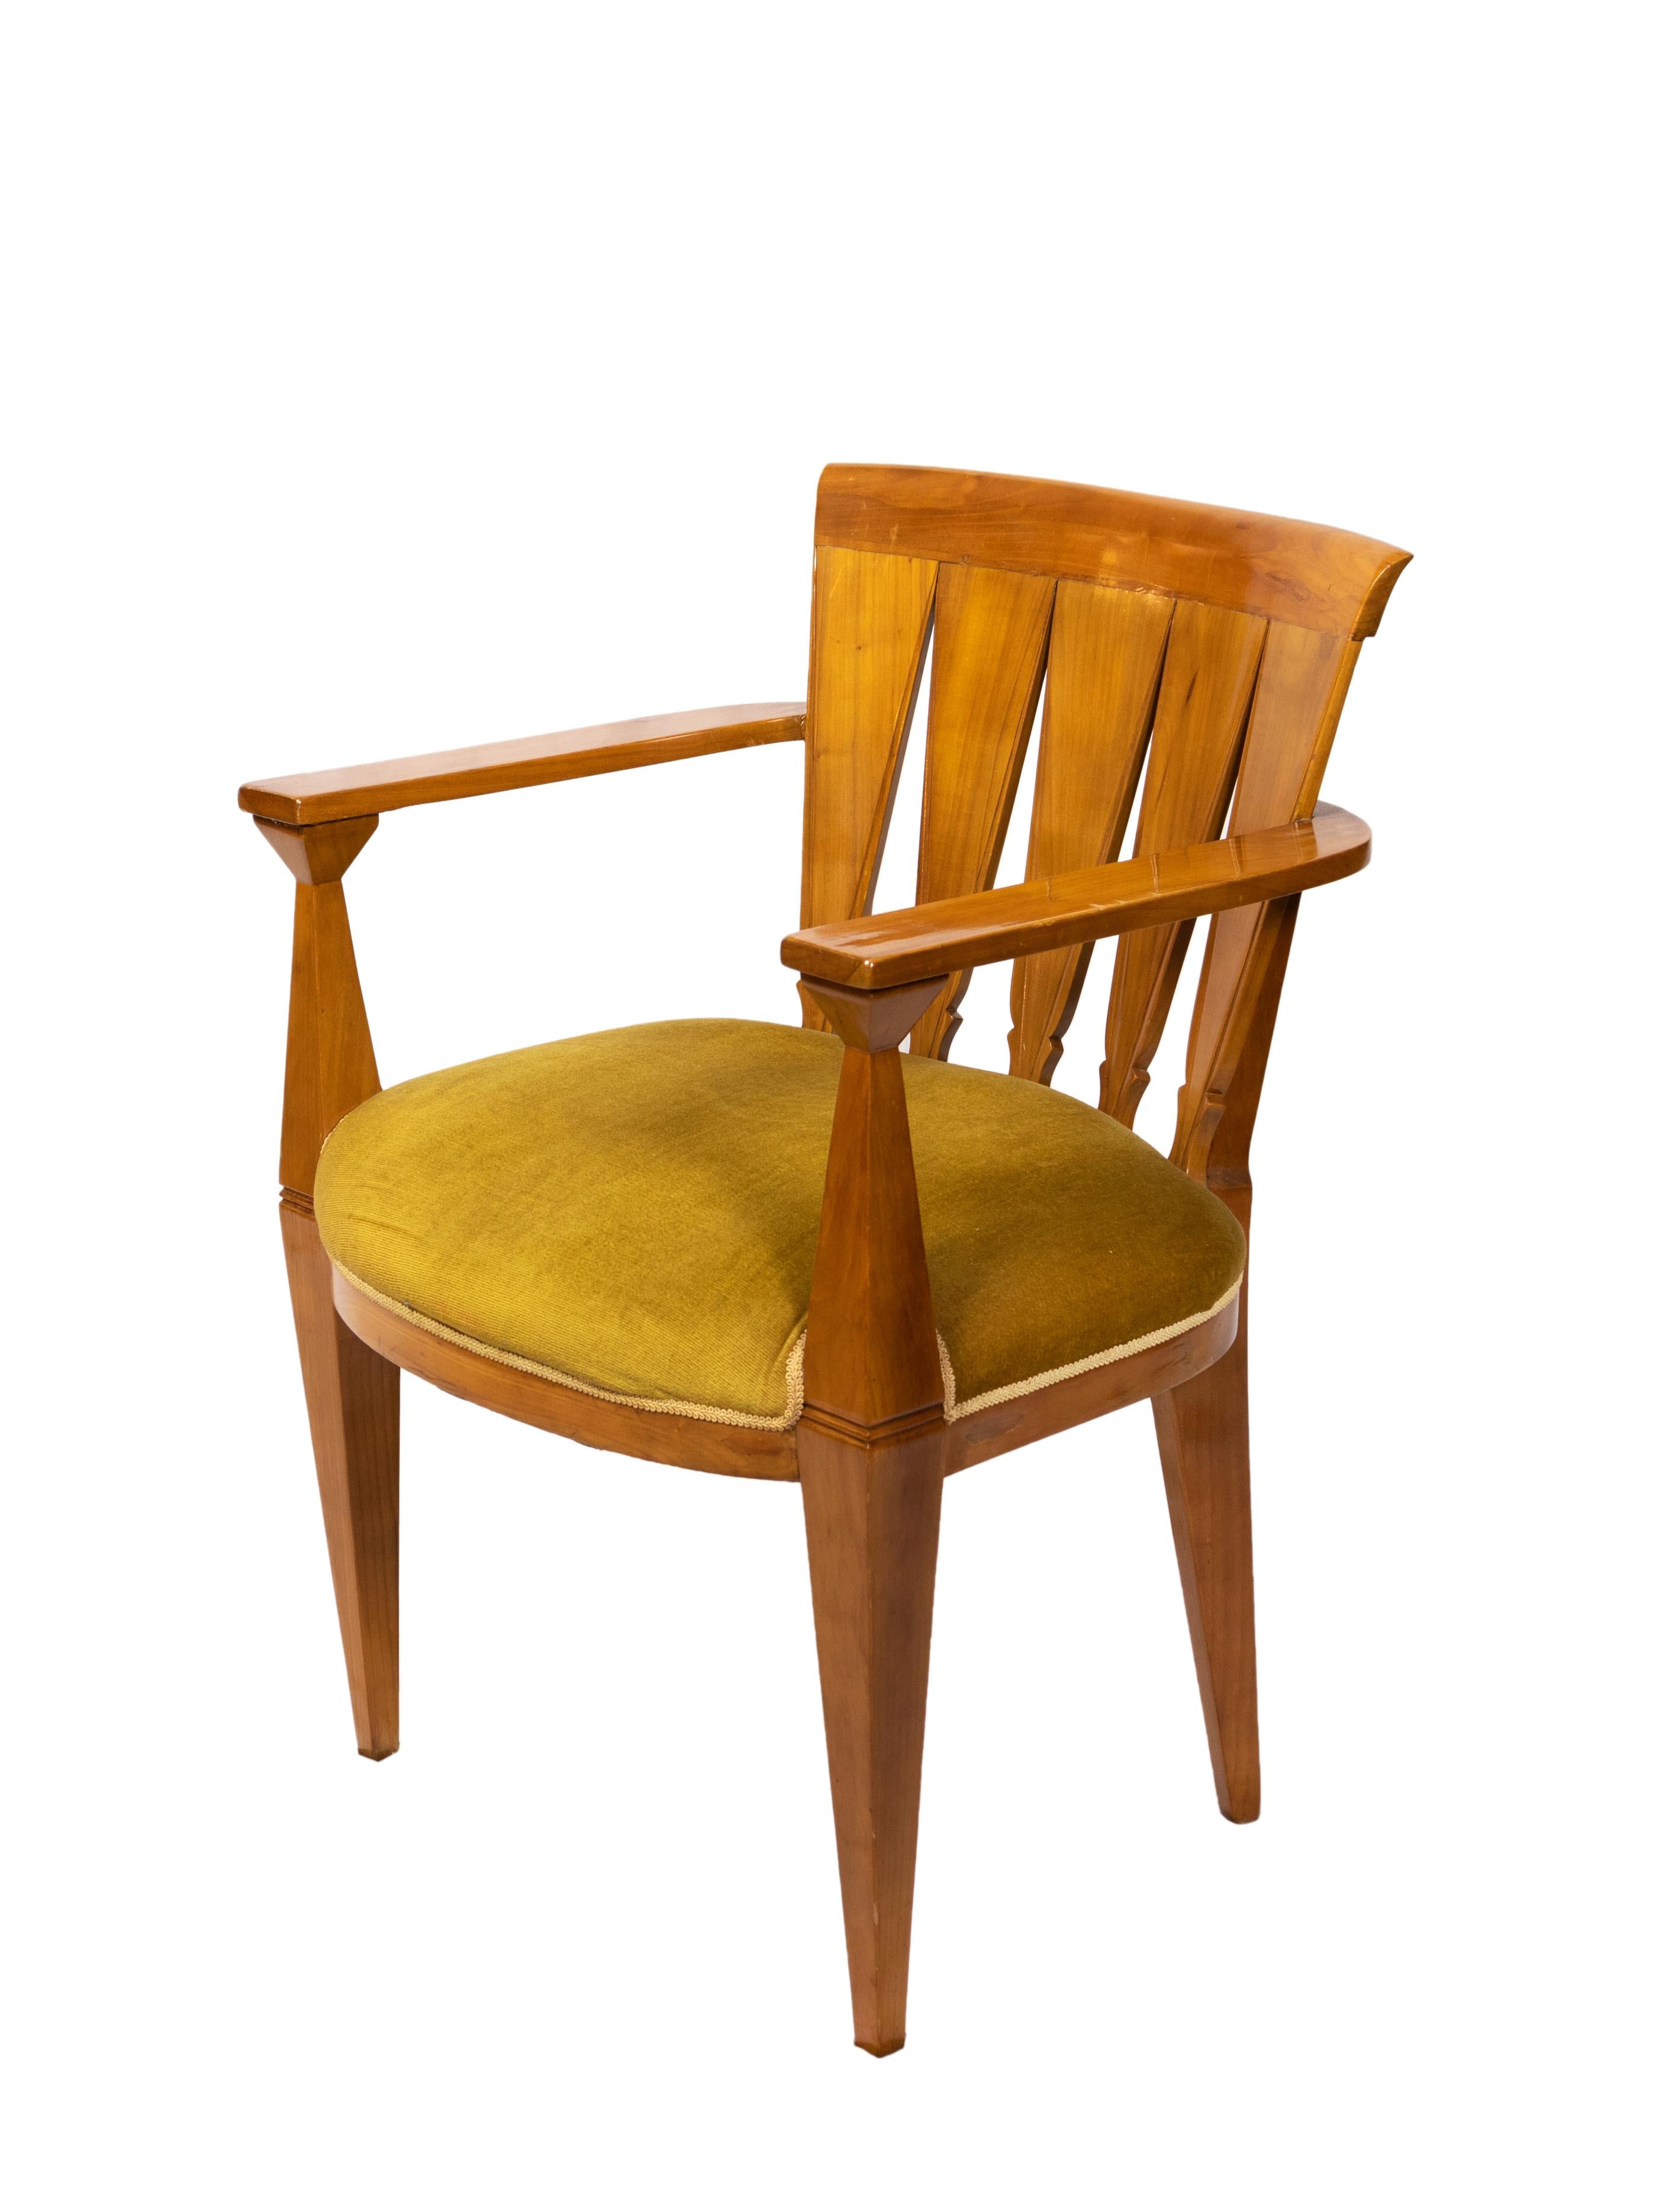 An Art Deco armchair with scalloped wooden backrest, armrests and wide seat, mustard-coloured upholstery.